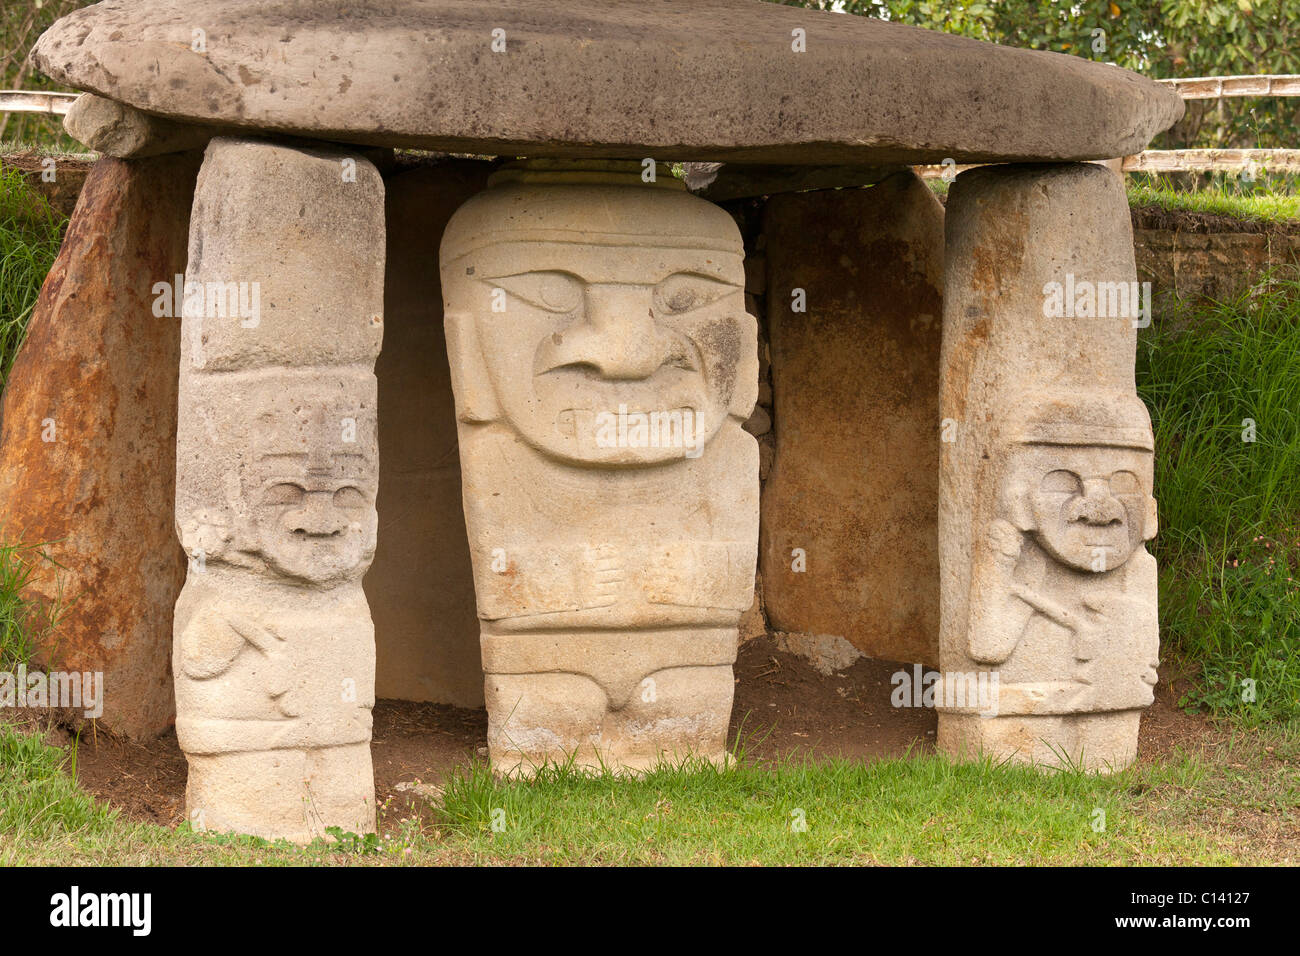 Taken at San Agustin archeological site, Colombia, South America, UNESCO world heritage site, in Huila department Stock Photo